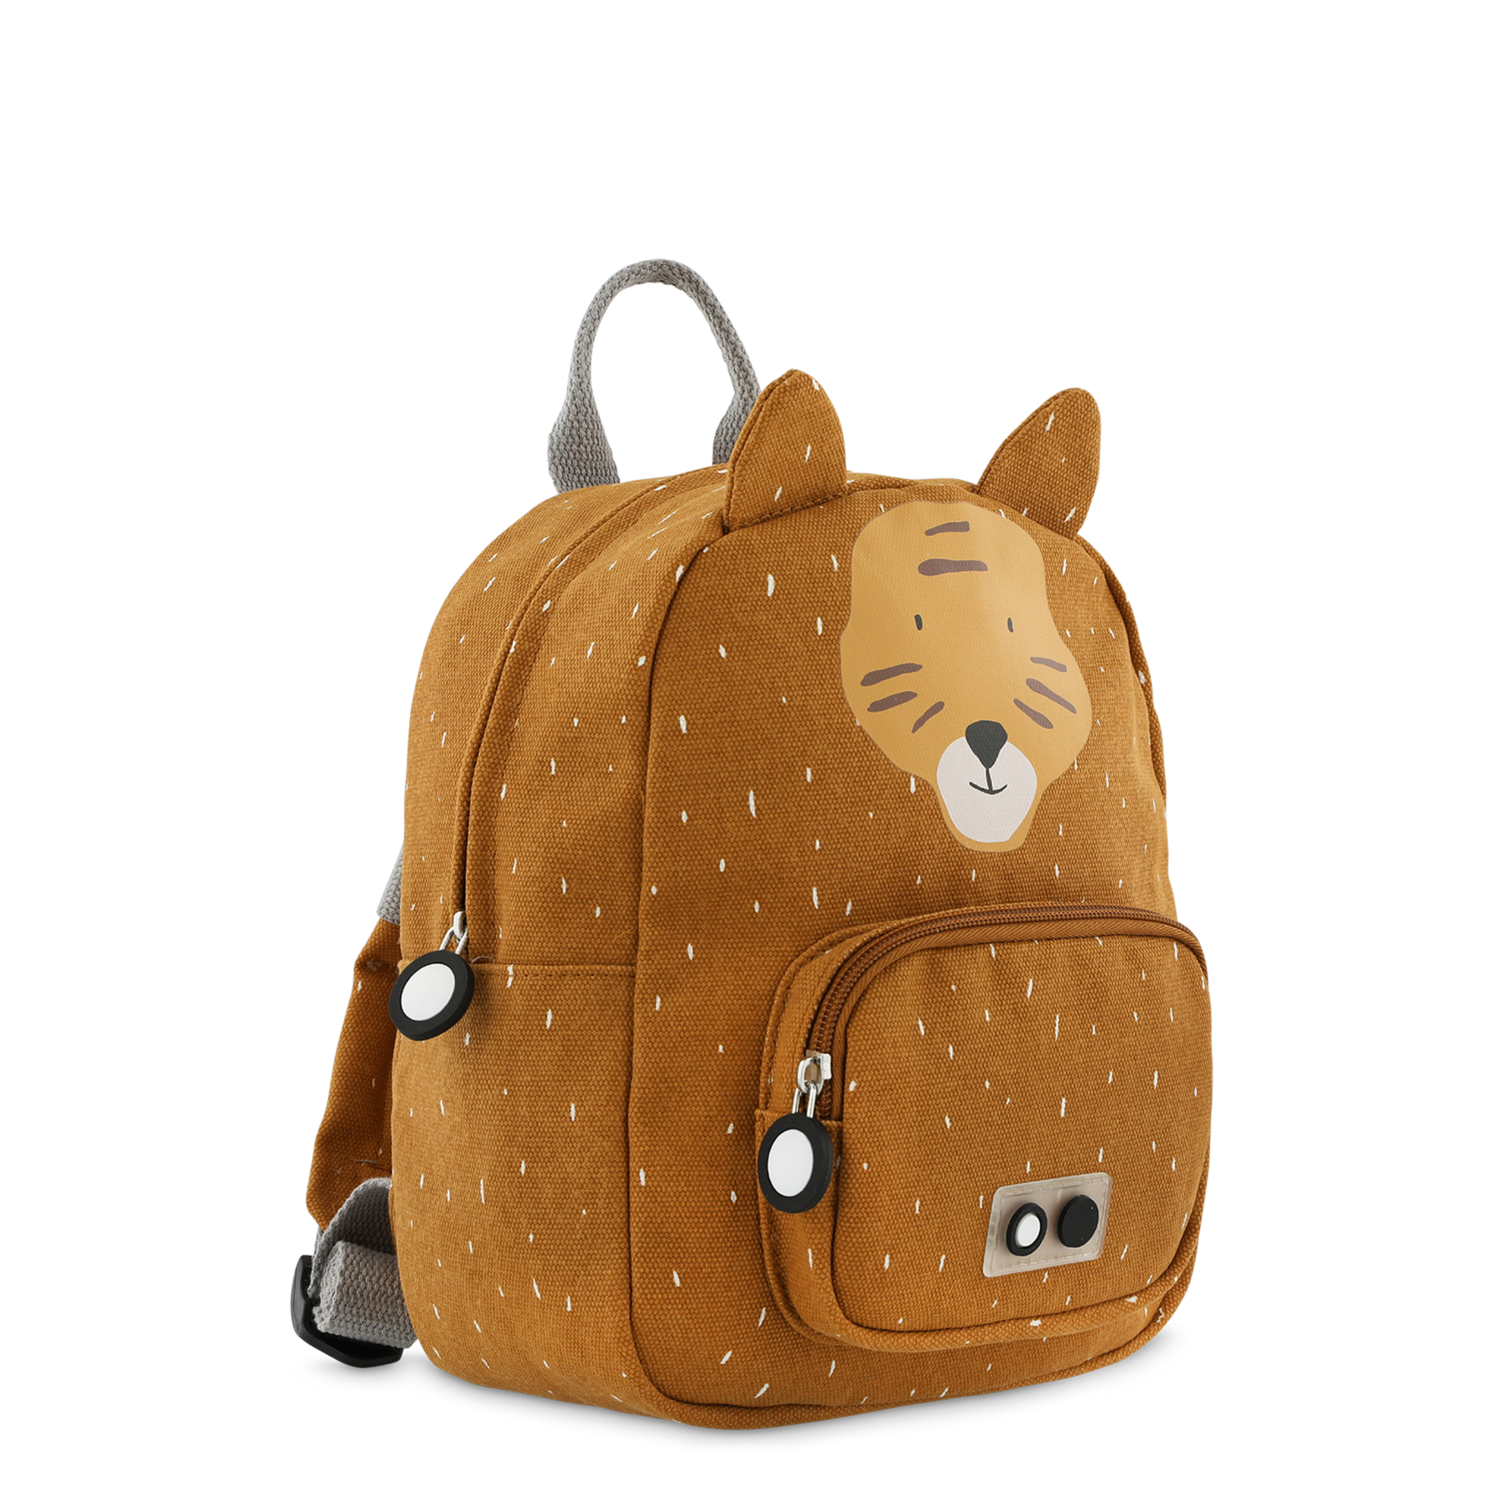 Backpack small - Mr. Tiger